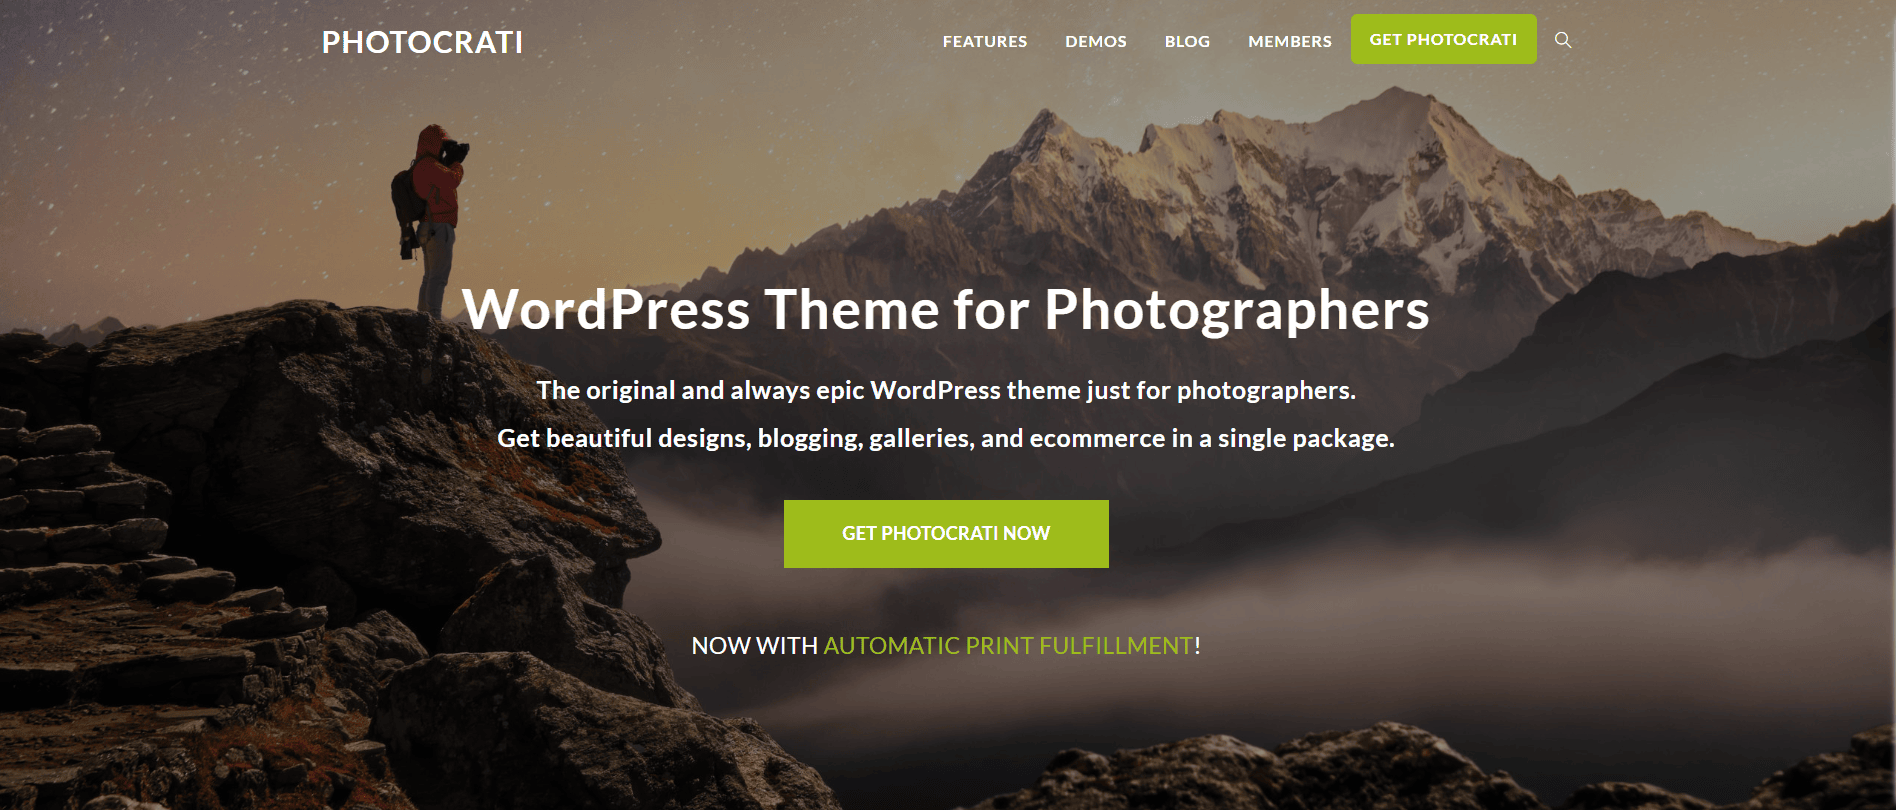 Photocrati's homepage banner showcasing a photographer on a mountain at sunrise, highlighting their WordPress theme for photographers with automatic print fulfillment.